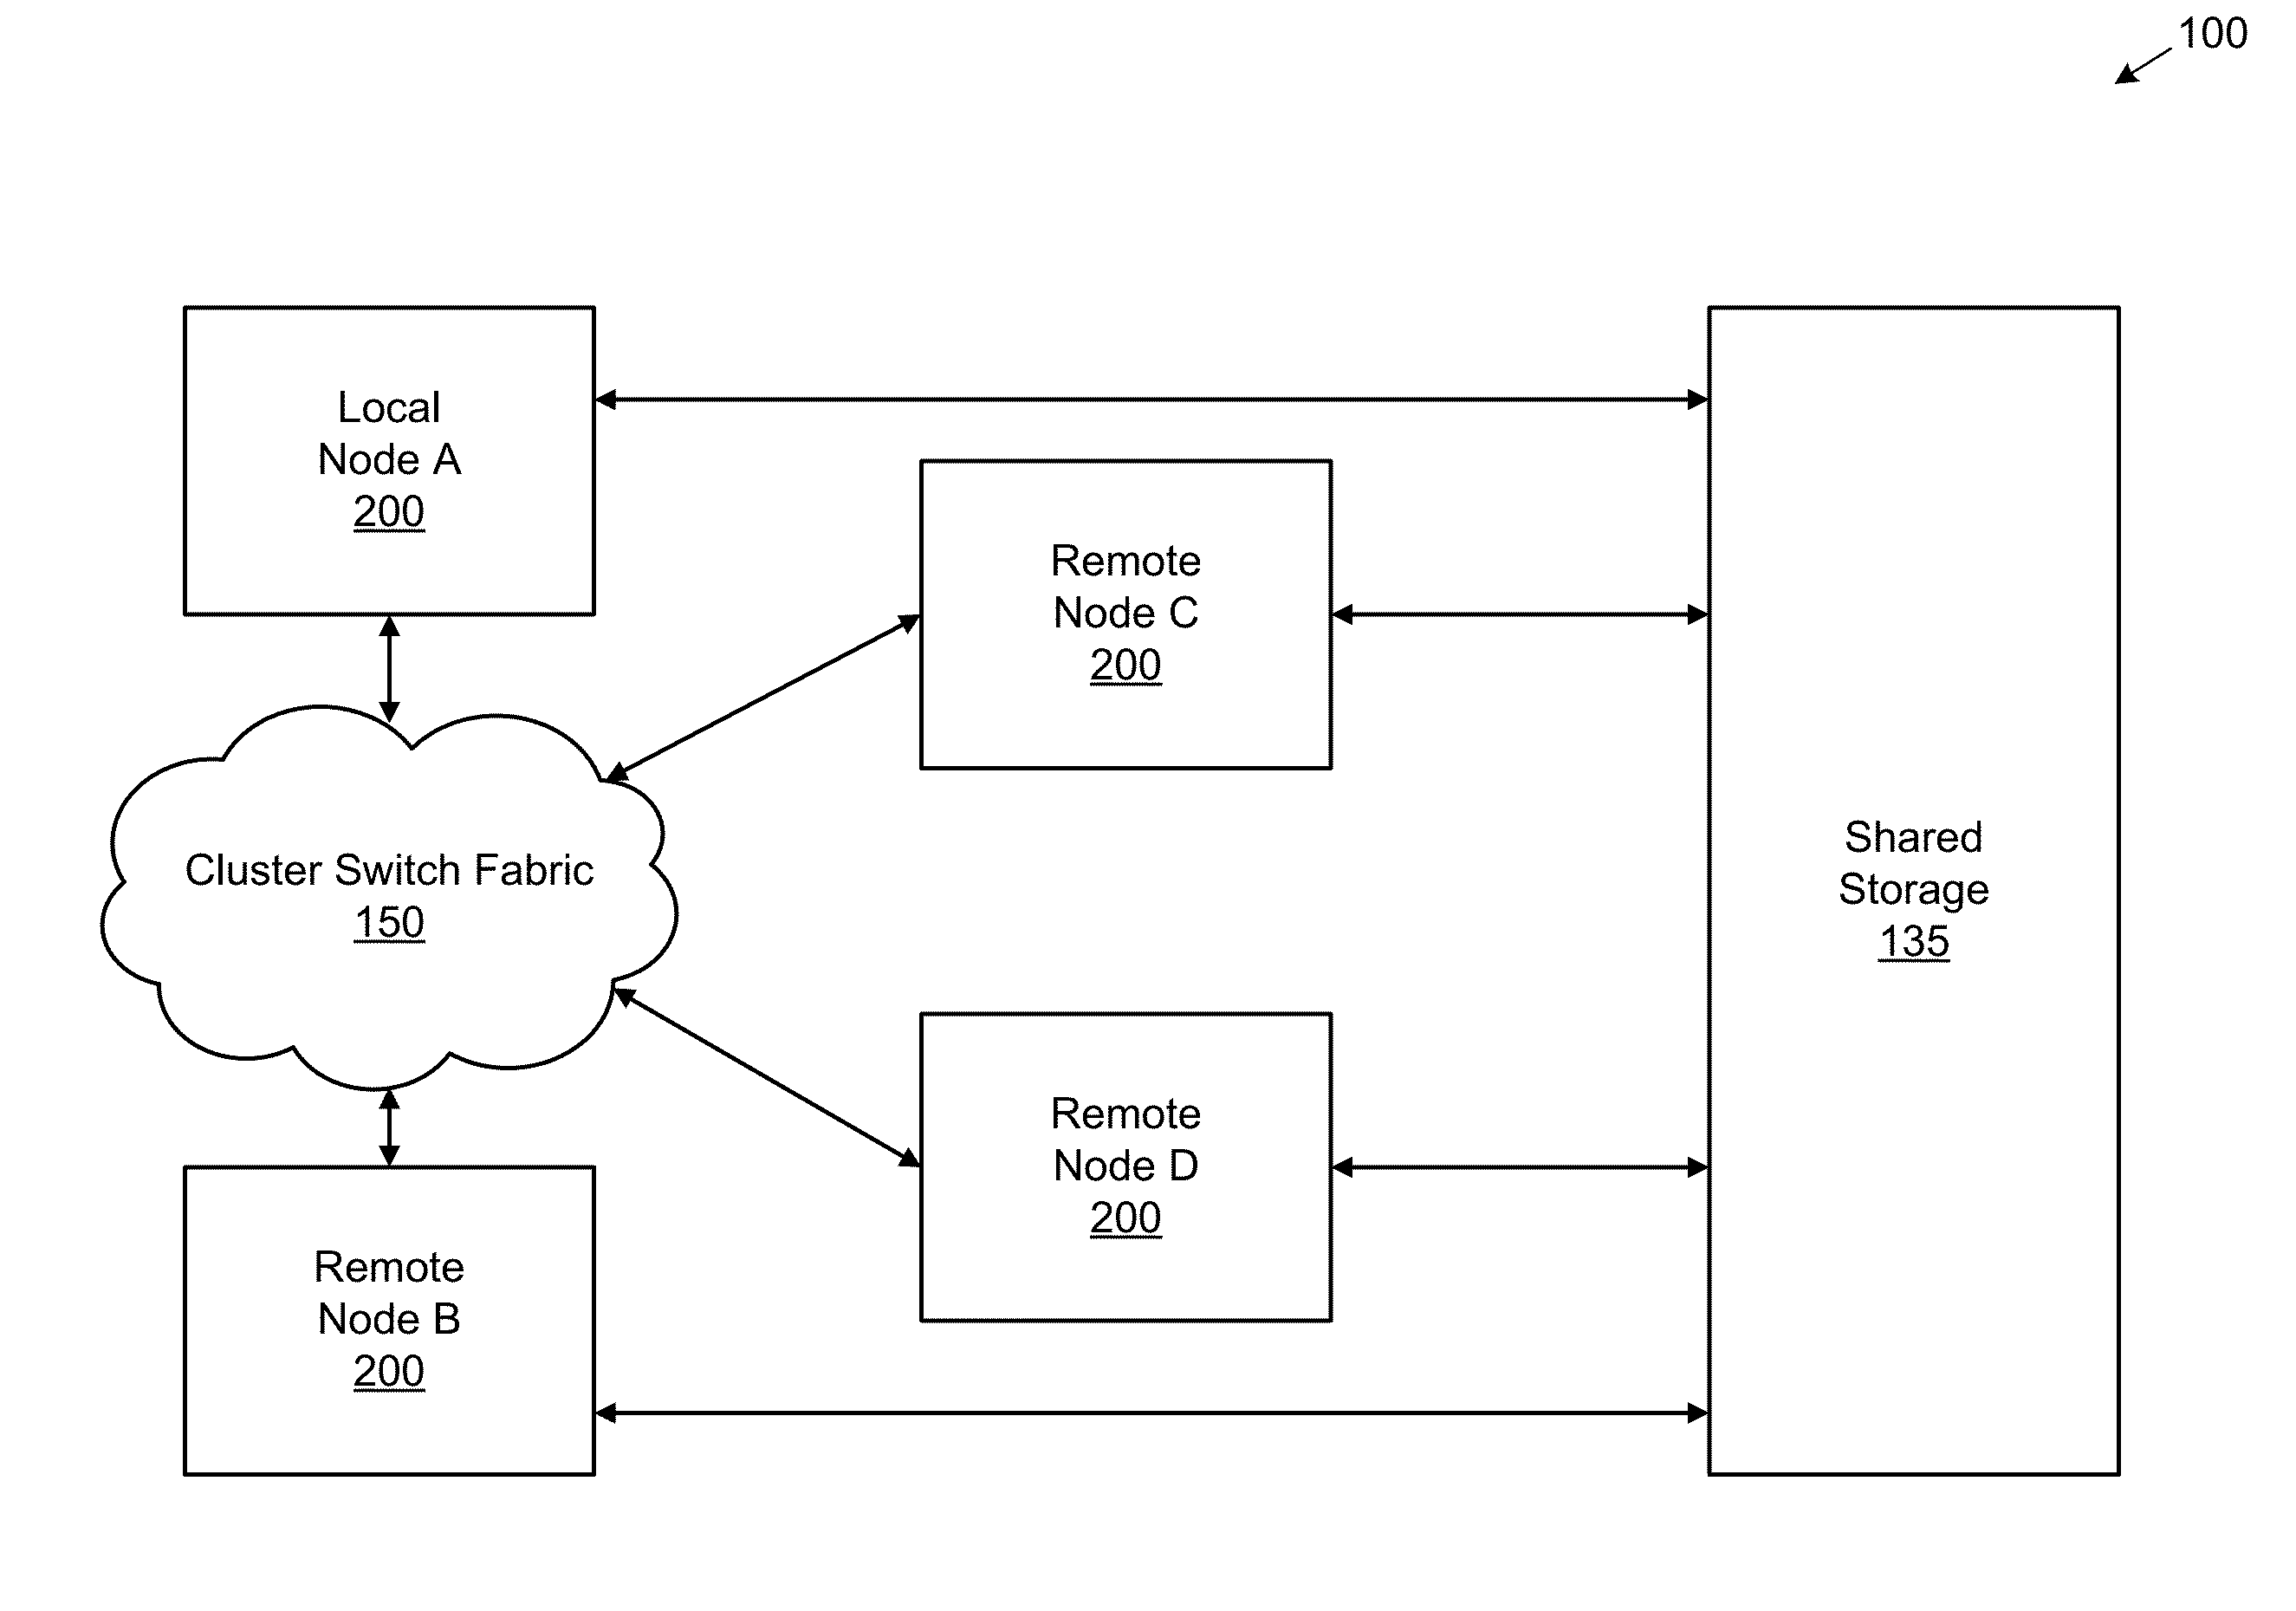 Coalescing Metadata for Mirroring to a Remote Storage Node in a Cluster Storage System